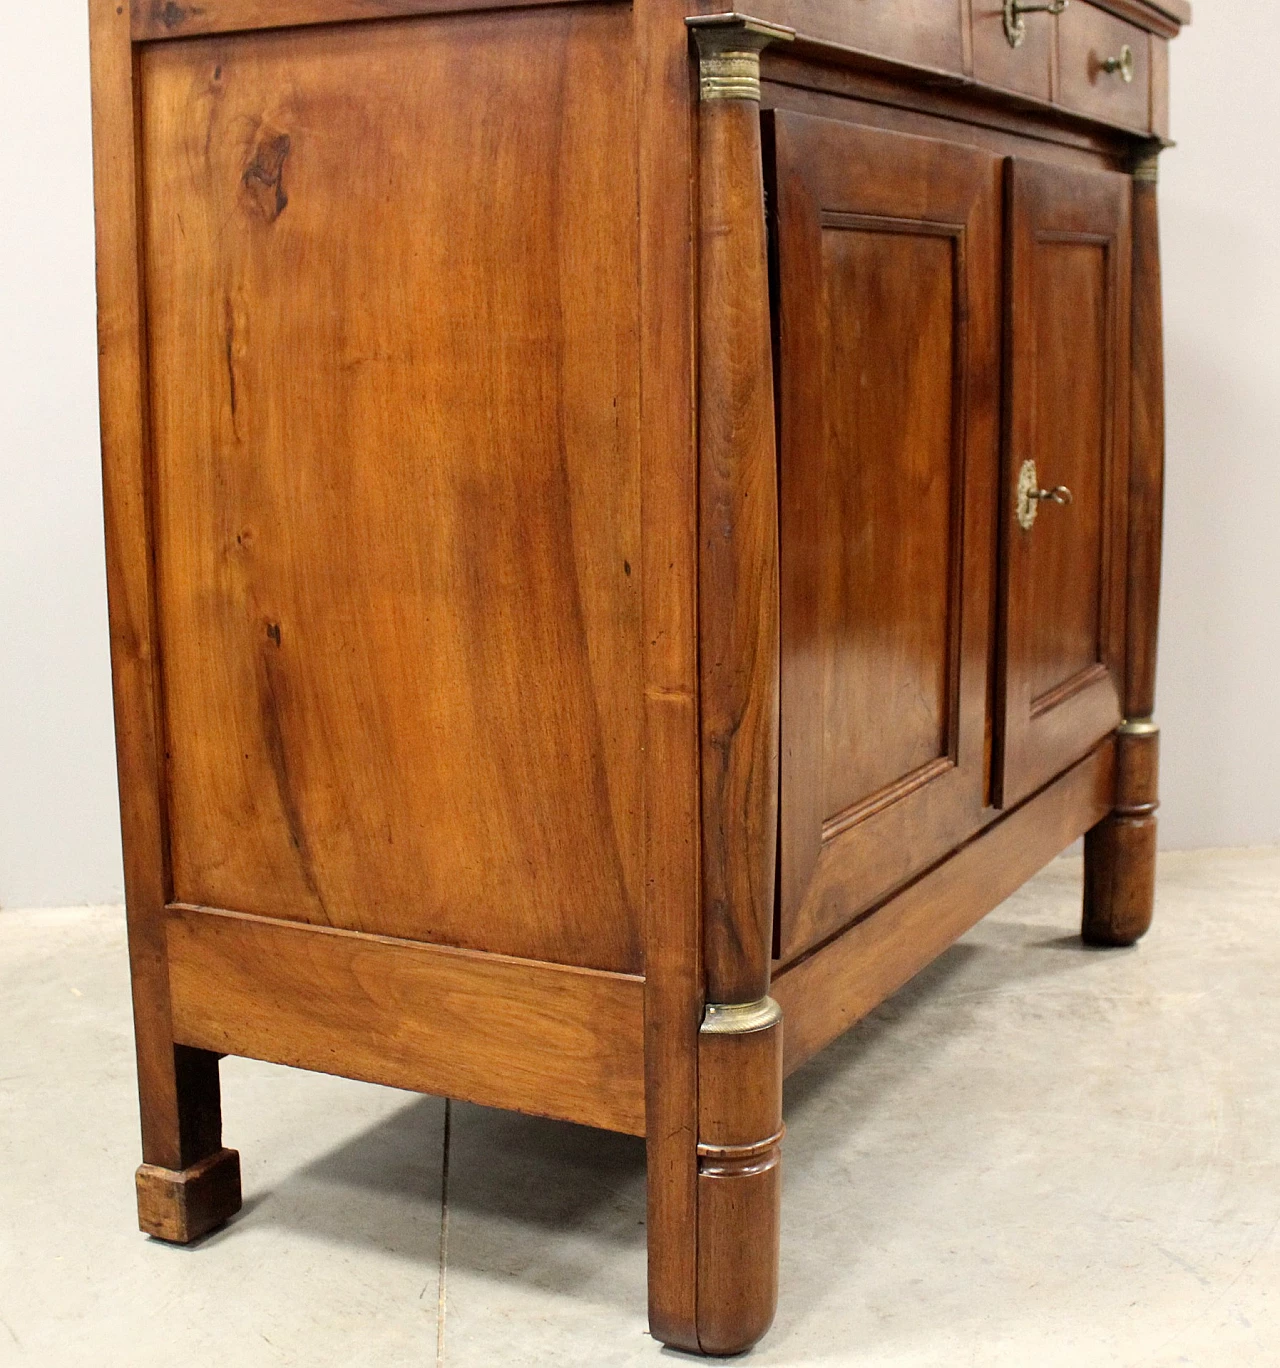 Empire walnut sideboard with doors and drawers, early 19th century 3